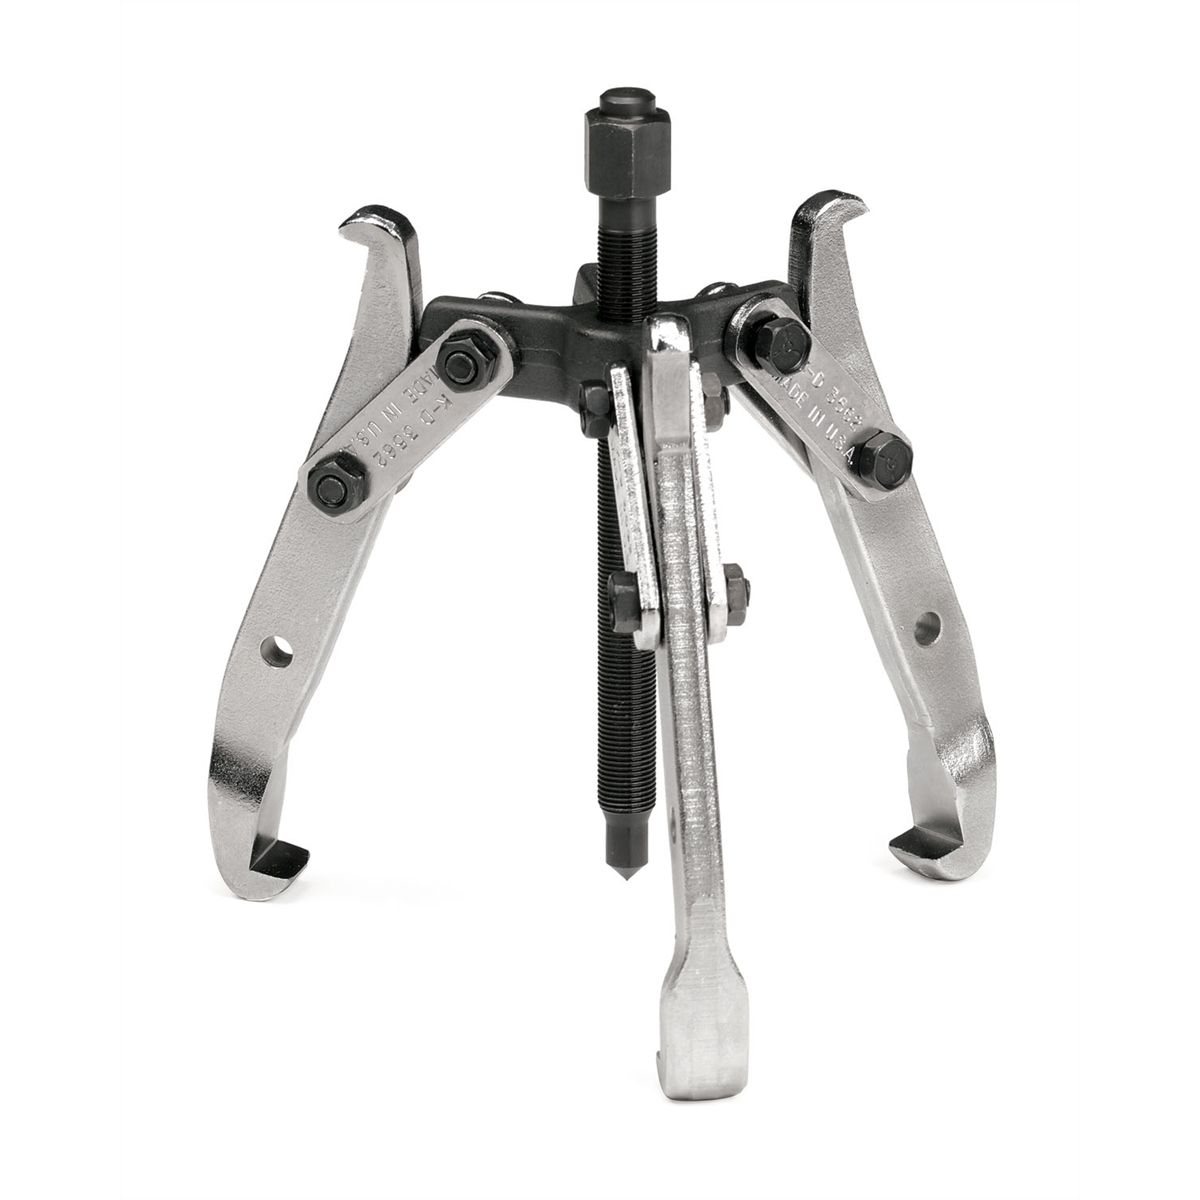 Combination 2 & 3 Jaw Reversible Gear Puller - 2 Ton 5 In Spread